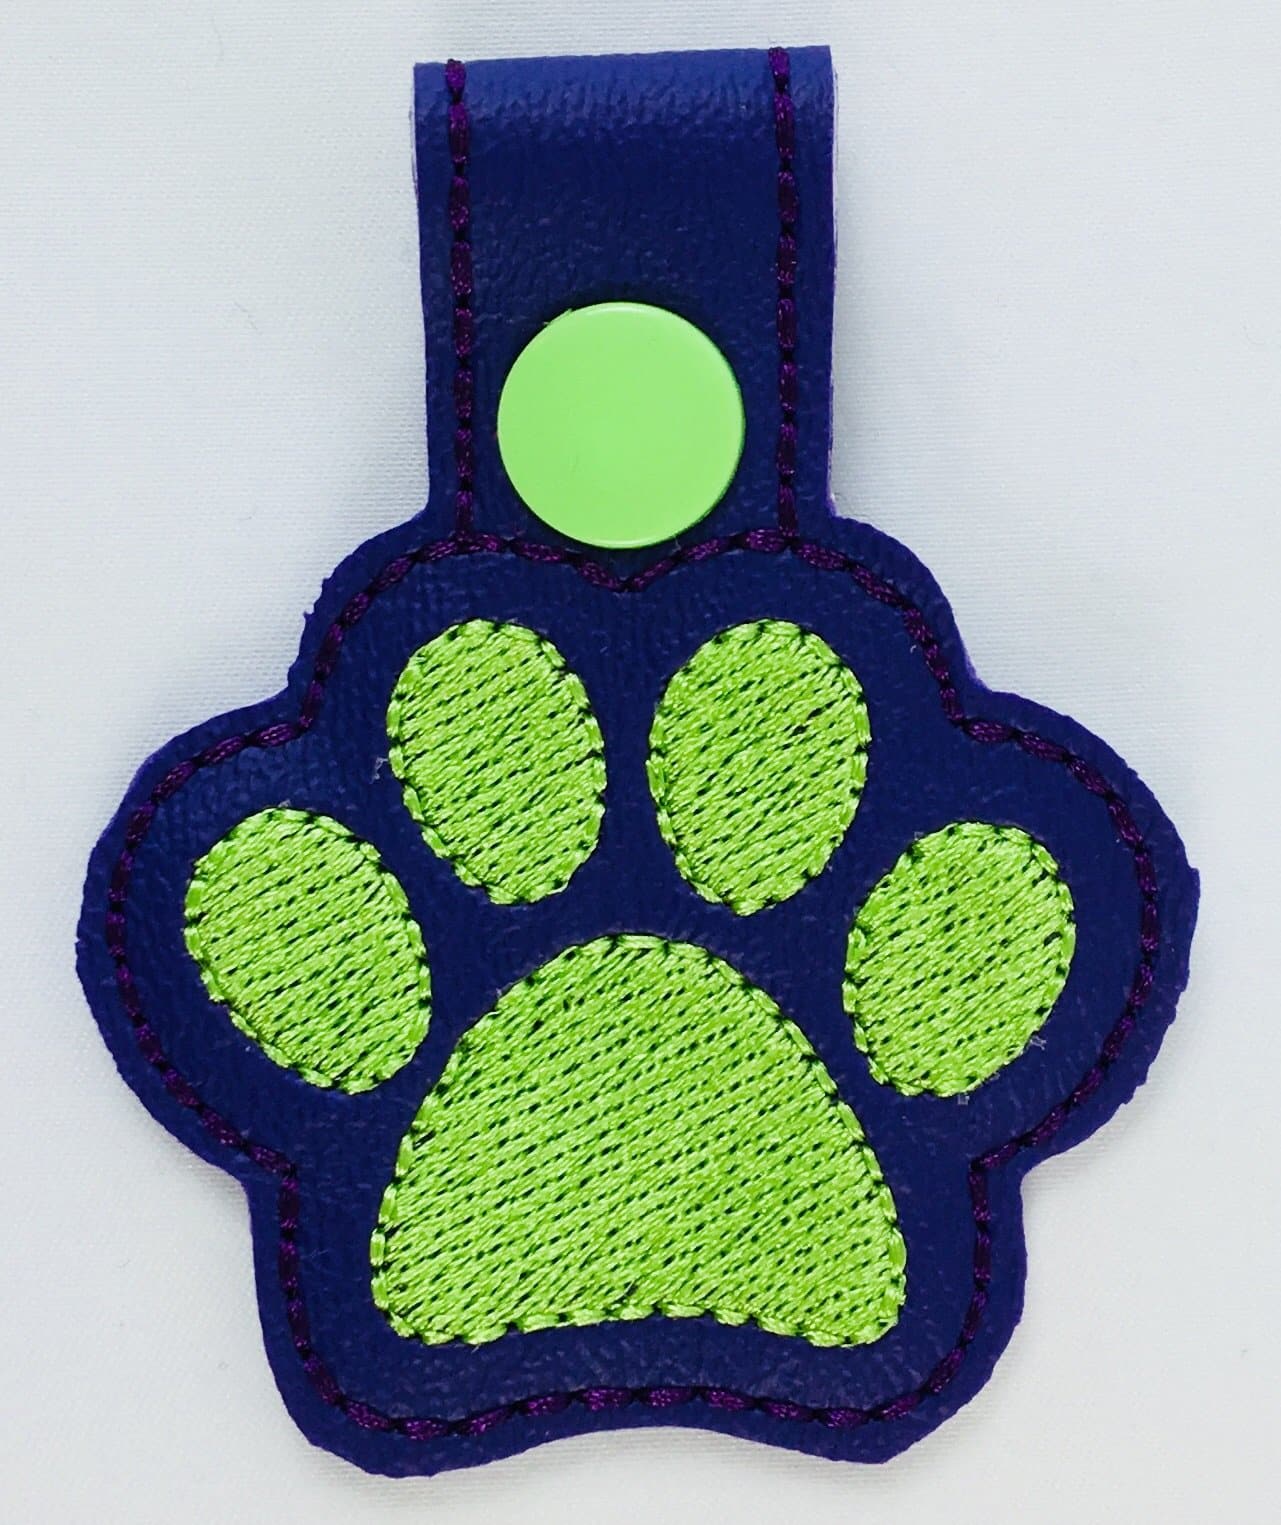 Paw Print Keychain Fob in green and blue